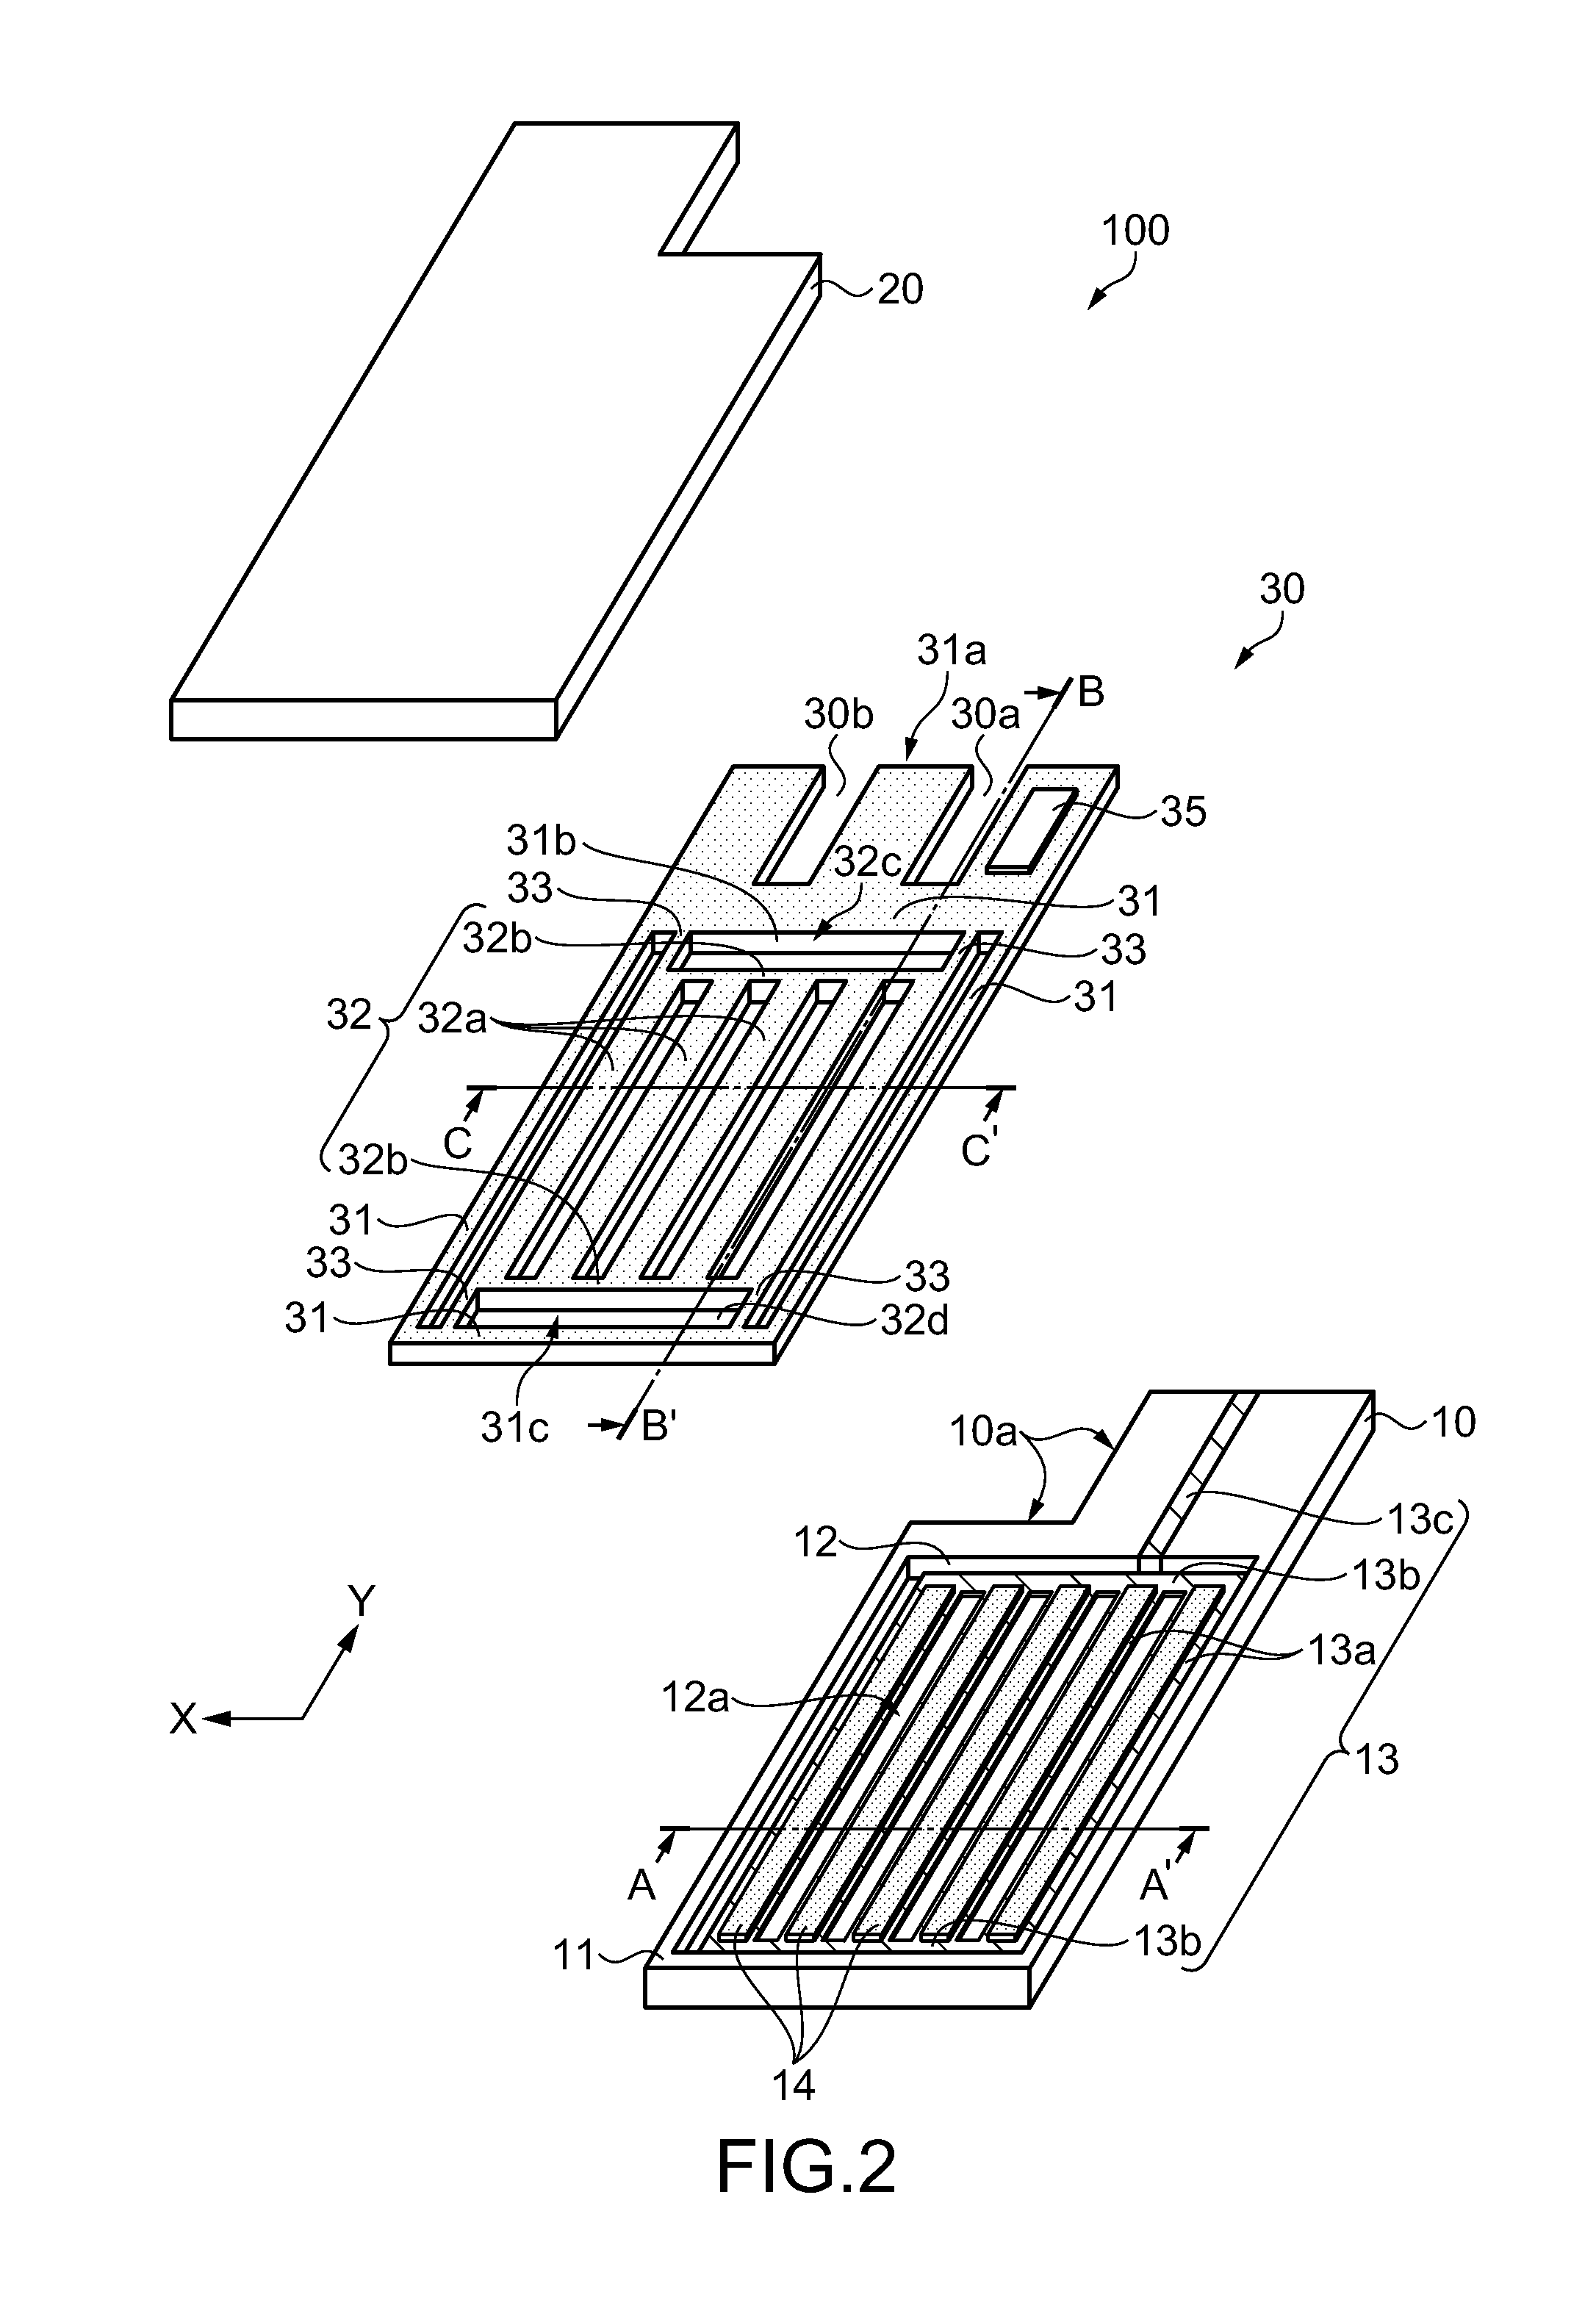 Electrostatic induction generation device and electrostatic induction generation apparatus having a movable electrode formed between a first fixed electrode substrate and a second fixed electrode substrate